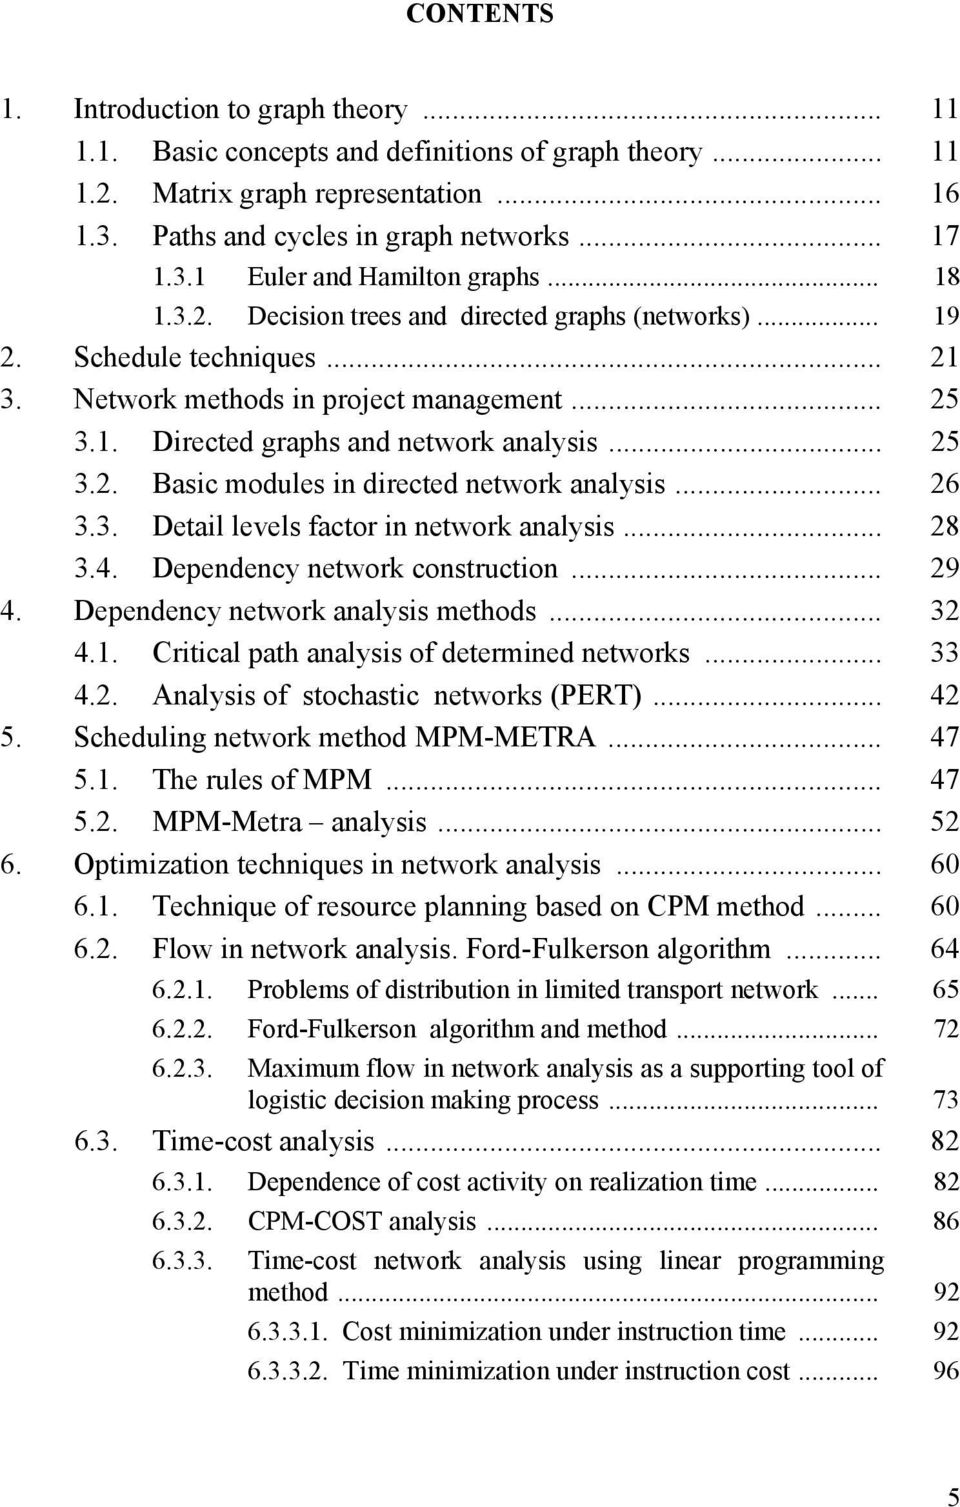 .. 26 3.3. Detail levels factor in network analysis... 28 3.4. Dependency network construction... 29 4. Dependency network analysis methods... 32 4.1. Critical path analysis of determined networks.